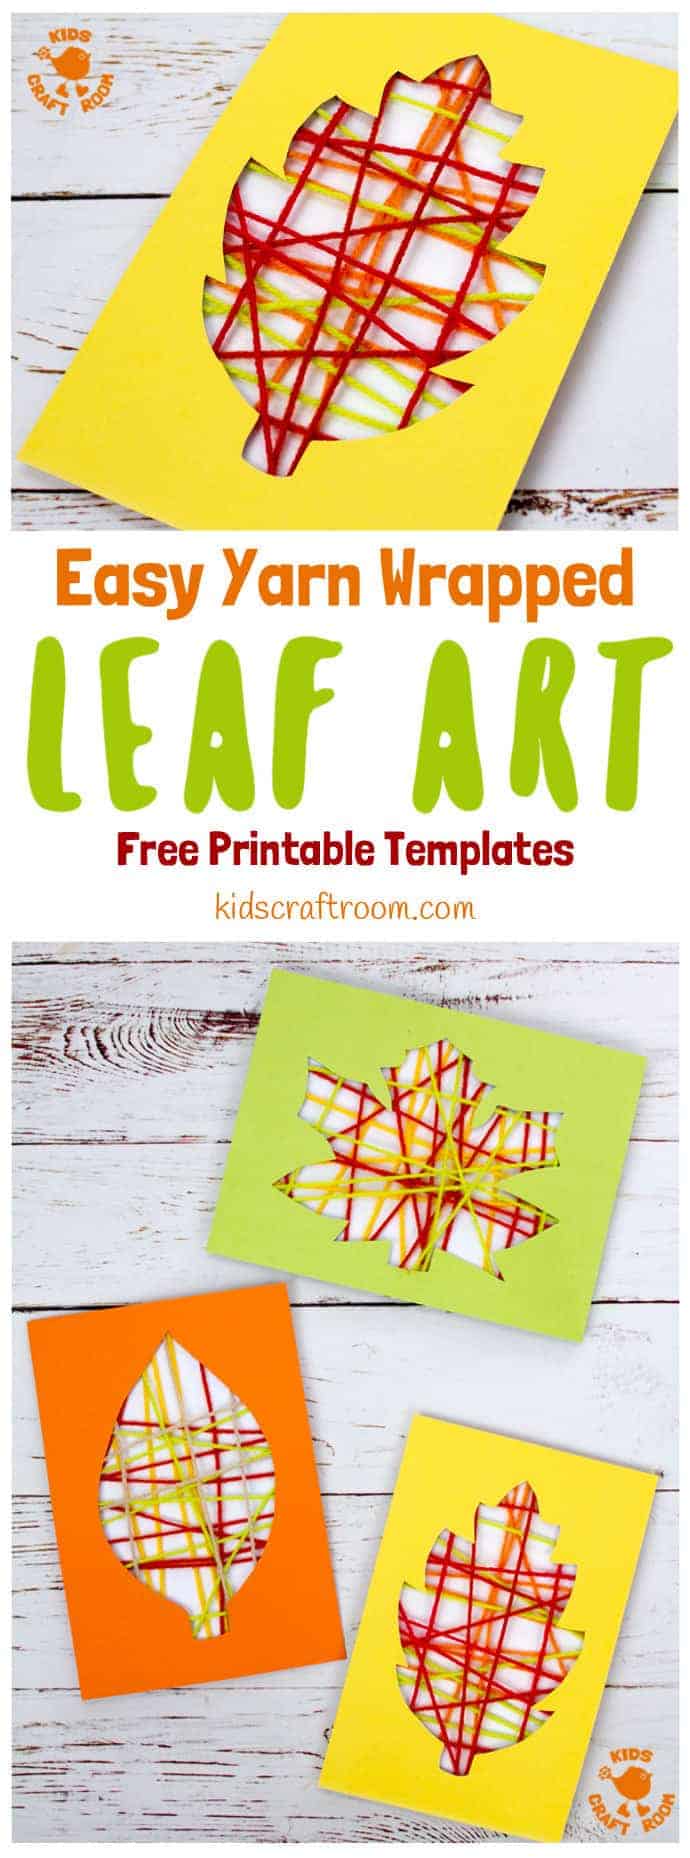 This Yarn Wrapped Leaf Craft is so pretty! A fabulous way to capture the colours of the season and build fine motor skills. An easy to make leaf craft with 6 free printable templates to choose from. A simple and fun Fall craft for kids of all ages. #leaf #leaves #Fallcrafts #Fallart #leafcrafts #leafart #Autumnart #Autumncrafts #yarncrafts #kidscrafts #kidsactivities #finemotorskills #yarn #kidscraftroom